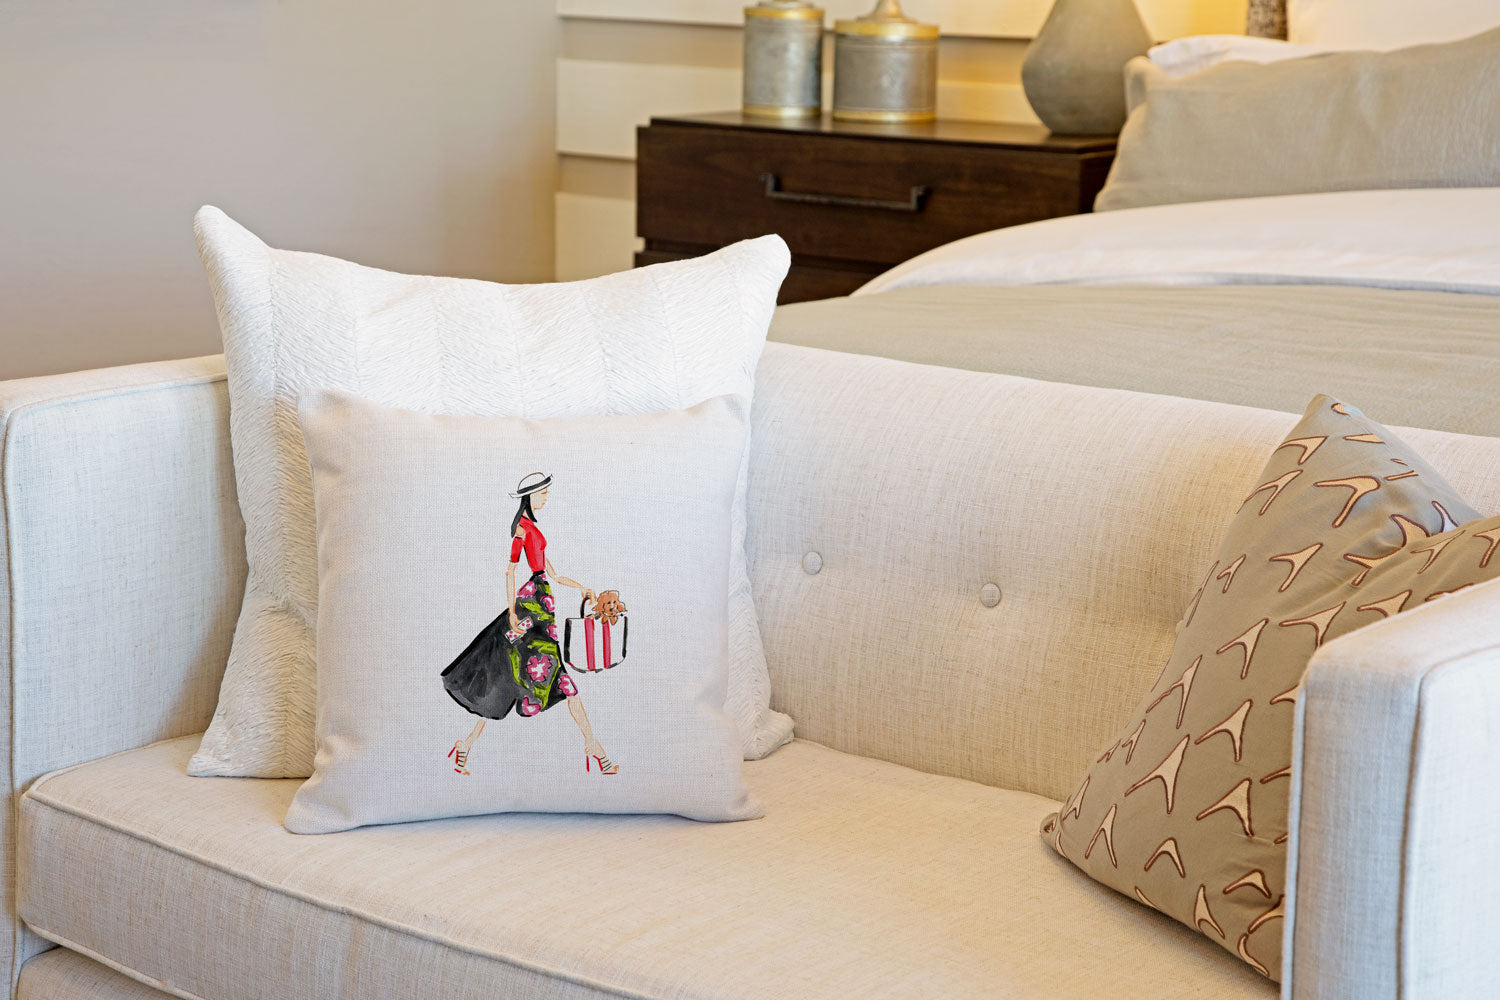 Runway Throw Pillow Cover - Fashion Illustrations Throw Pillow Cover Collection-Di Lewis